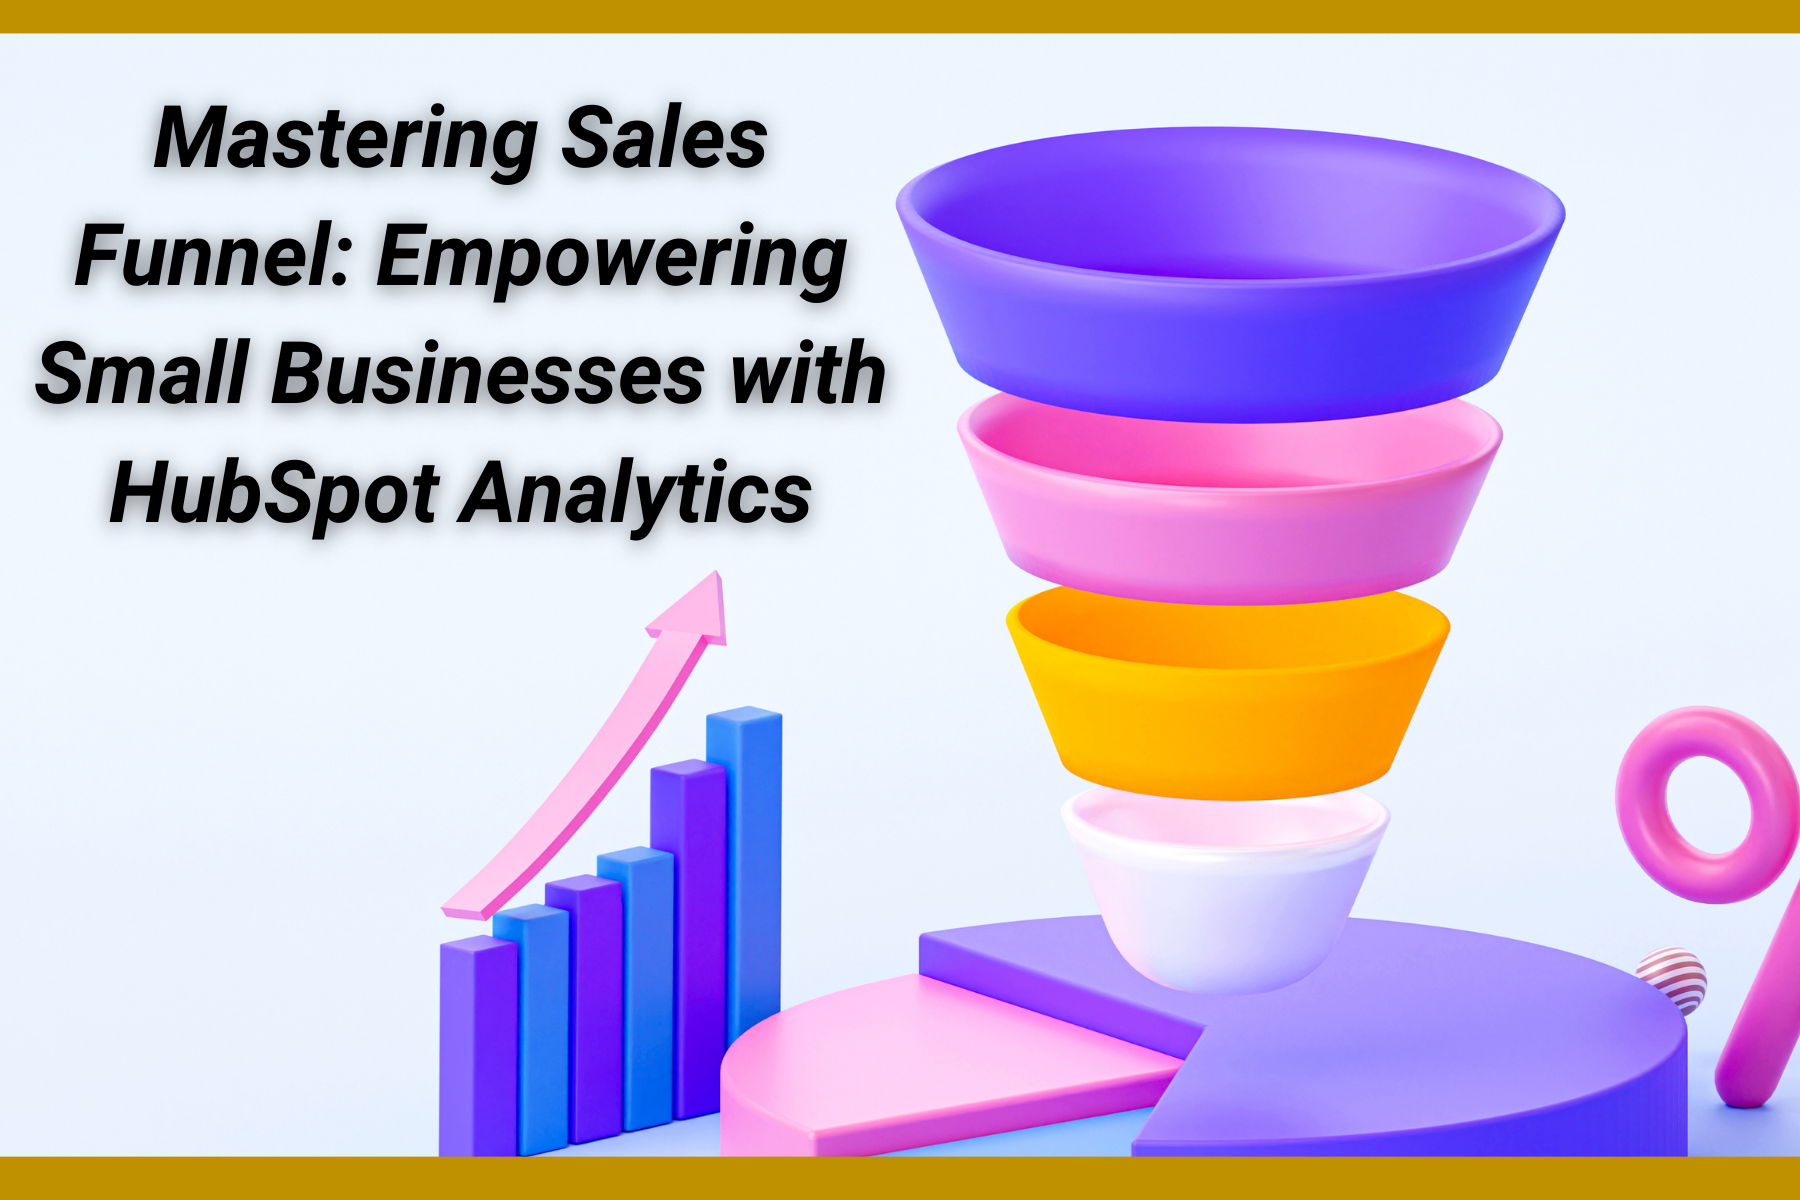 Mastering Sales Funnel: Empowering Small Businesses with HubSpot Analytics